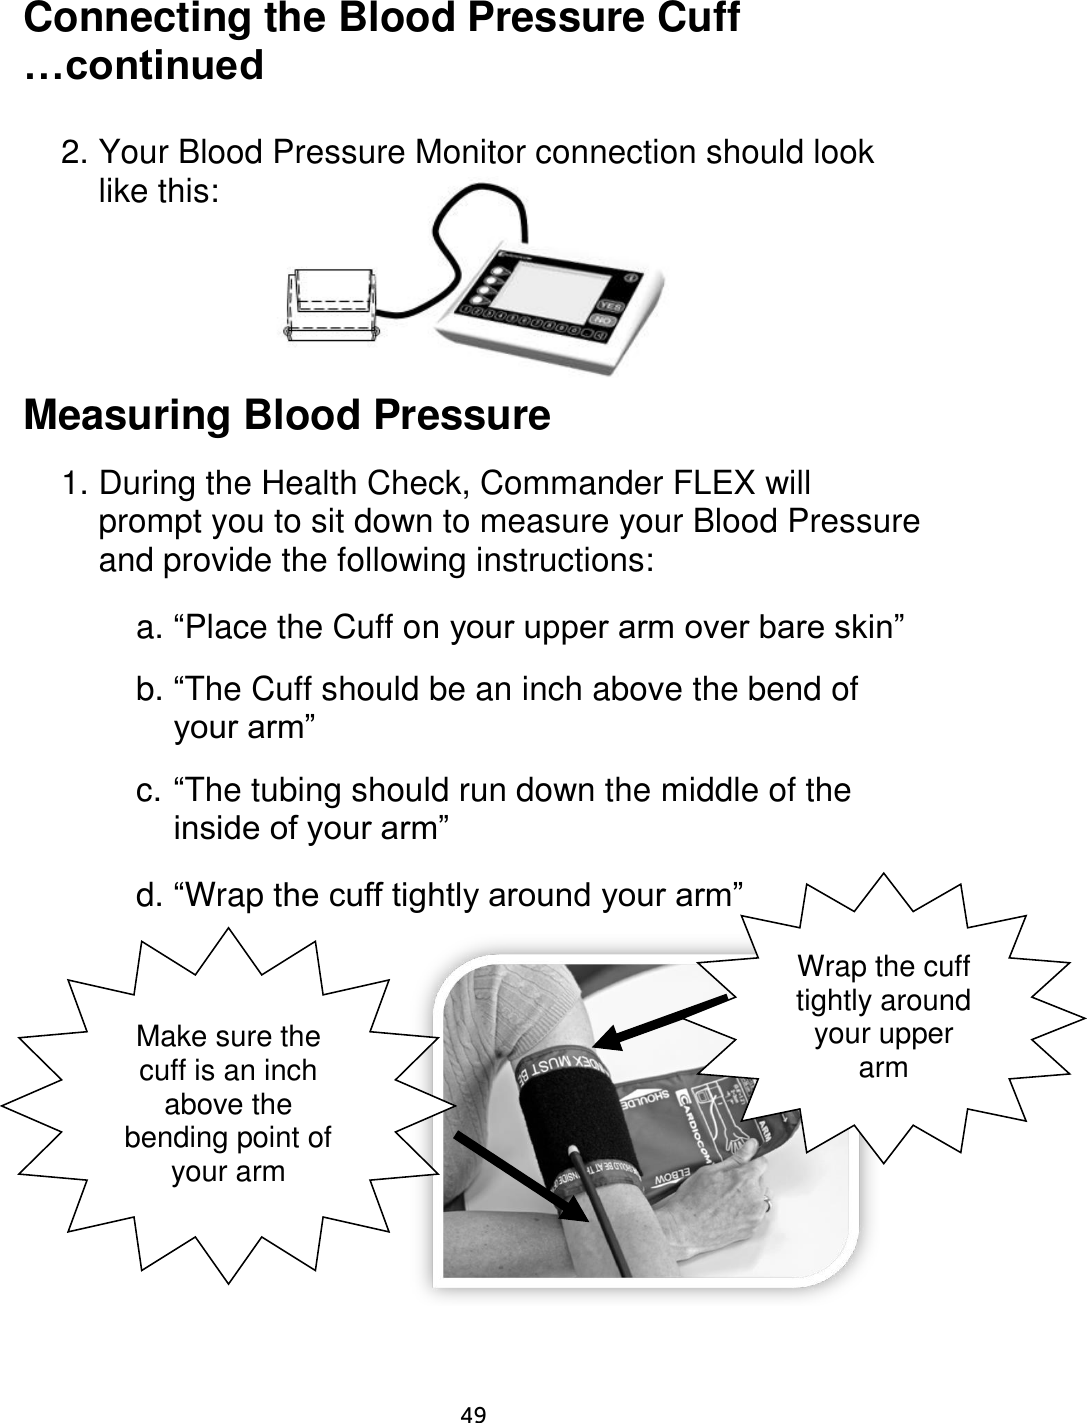                      49 Connecting the Blood Pressure Cuff …continued  2. Your Blood Pressure Monitor connection should look like this:       Measuring Blood Pressure  1. During the Health Check, Commander FLEX will prompt you to sit down to measure your Blood Pressure and provide the following instructions:    a. “Place the Cuff on your upper arm over bare skin”  b. “The Cuff should be an inch above the bend of your arm”  c. “The tubing should run down the middle of the inside of your arm”  d. “Wrap the cuff tightly around your arm”           Make sure the cuff is an inch above the bending point of your arm Wrap the cuff tightly around your upper arm 